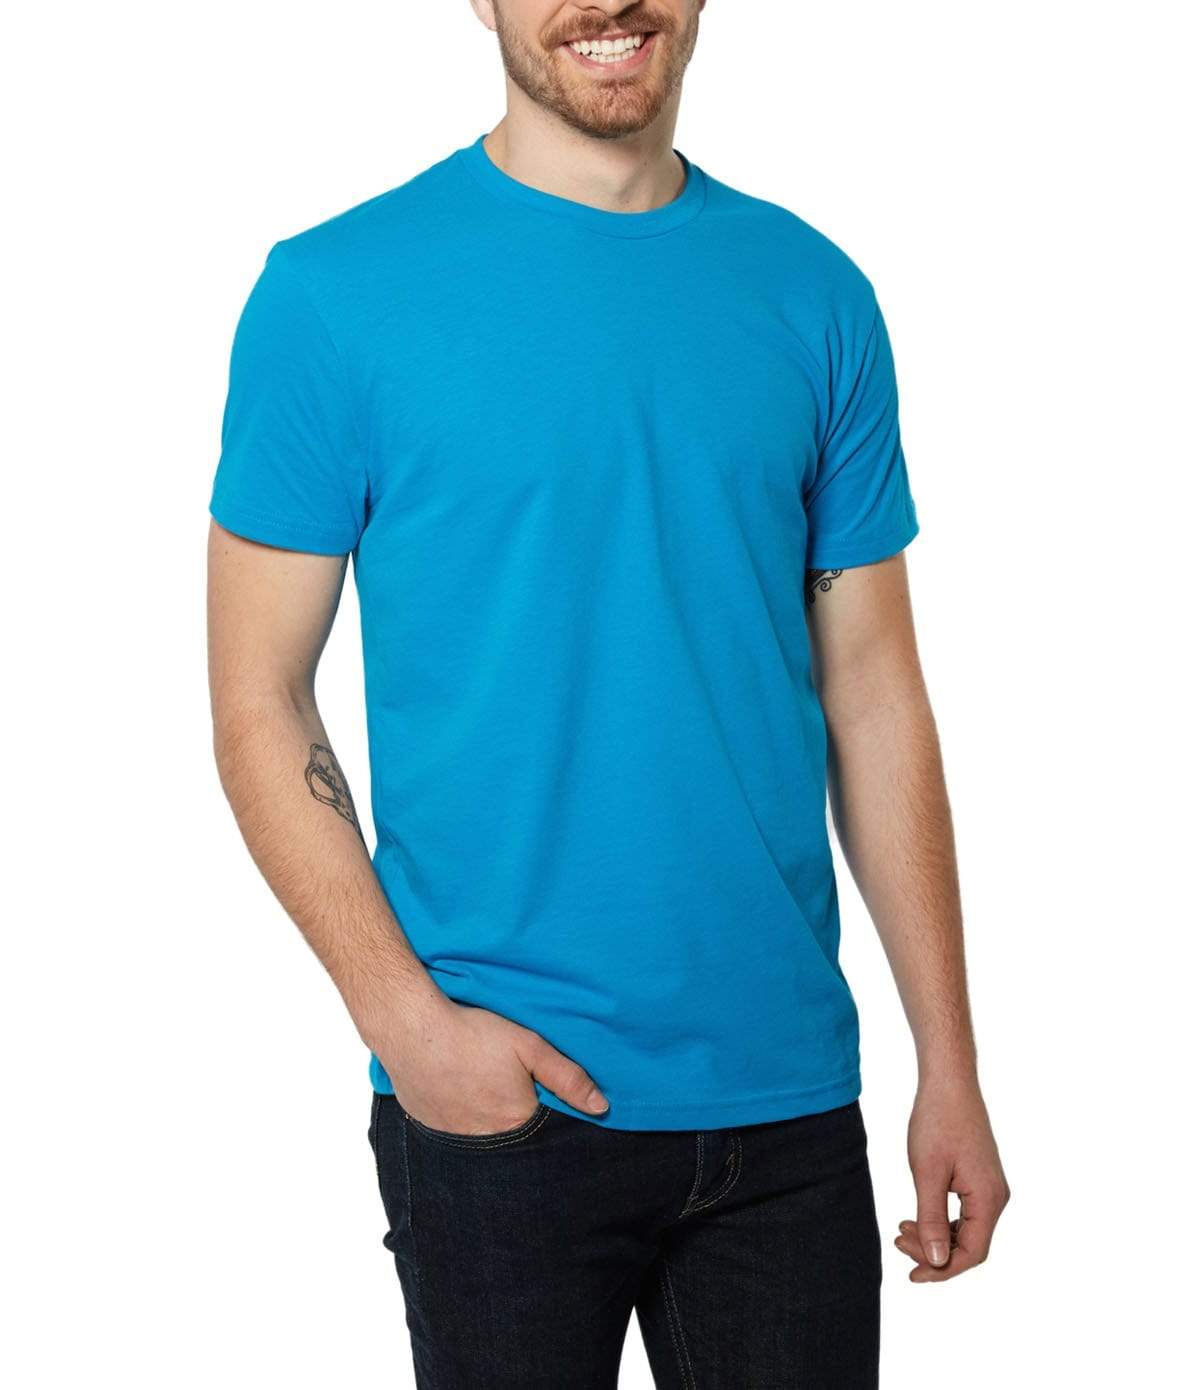 Shop Nayked Apparel Men's Ridiculously Soft Sueded Crew T-Shirt ...